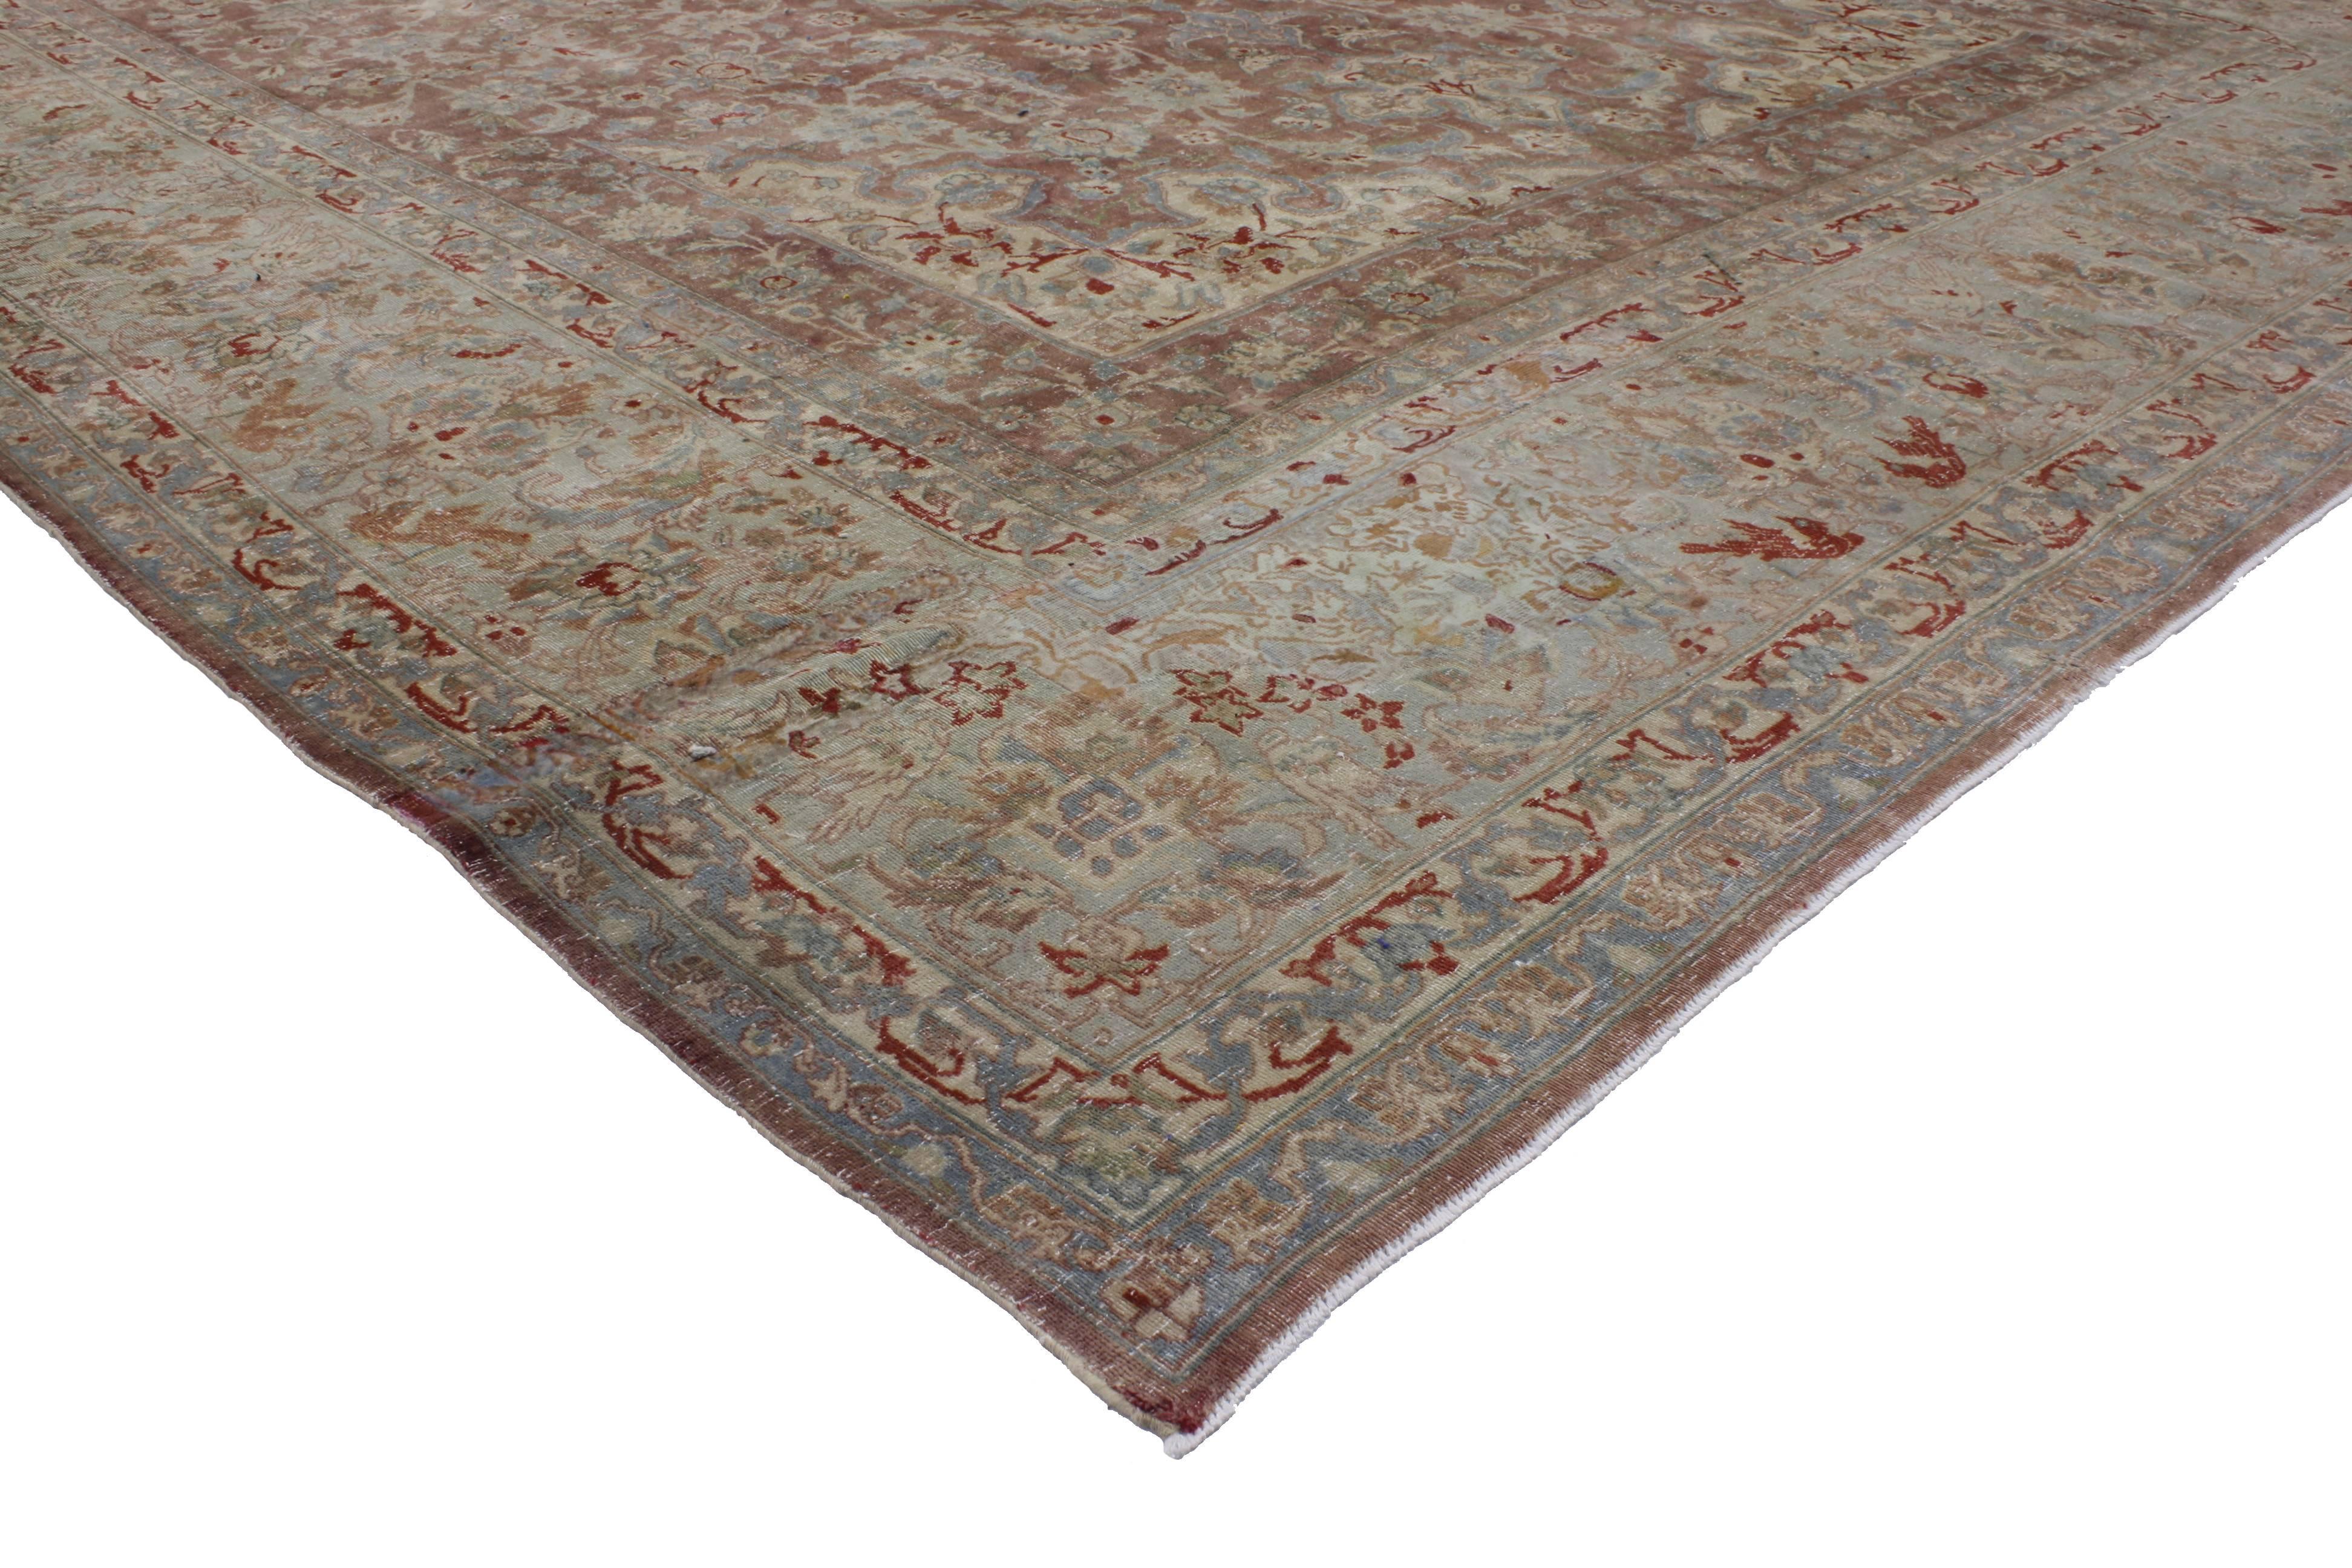 51796 Distressed Antique Persian Kerman Rug, Industrial Style Kirman Area Rug. This charming vintage Kerman (Kirman) rug features an all-over grand scale floral pattern with delicately colored botanical motifs and sweeping vines Meander across the